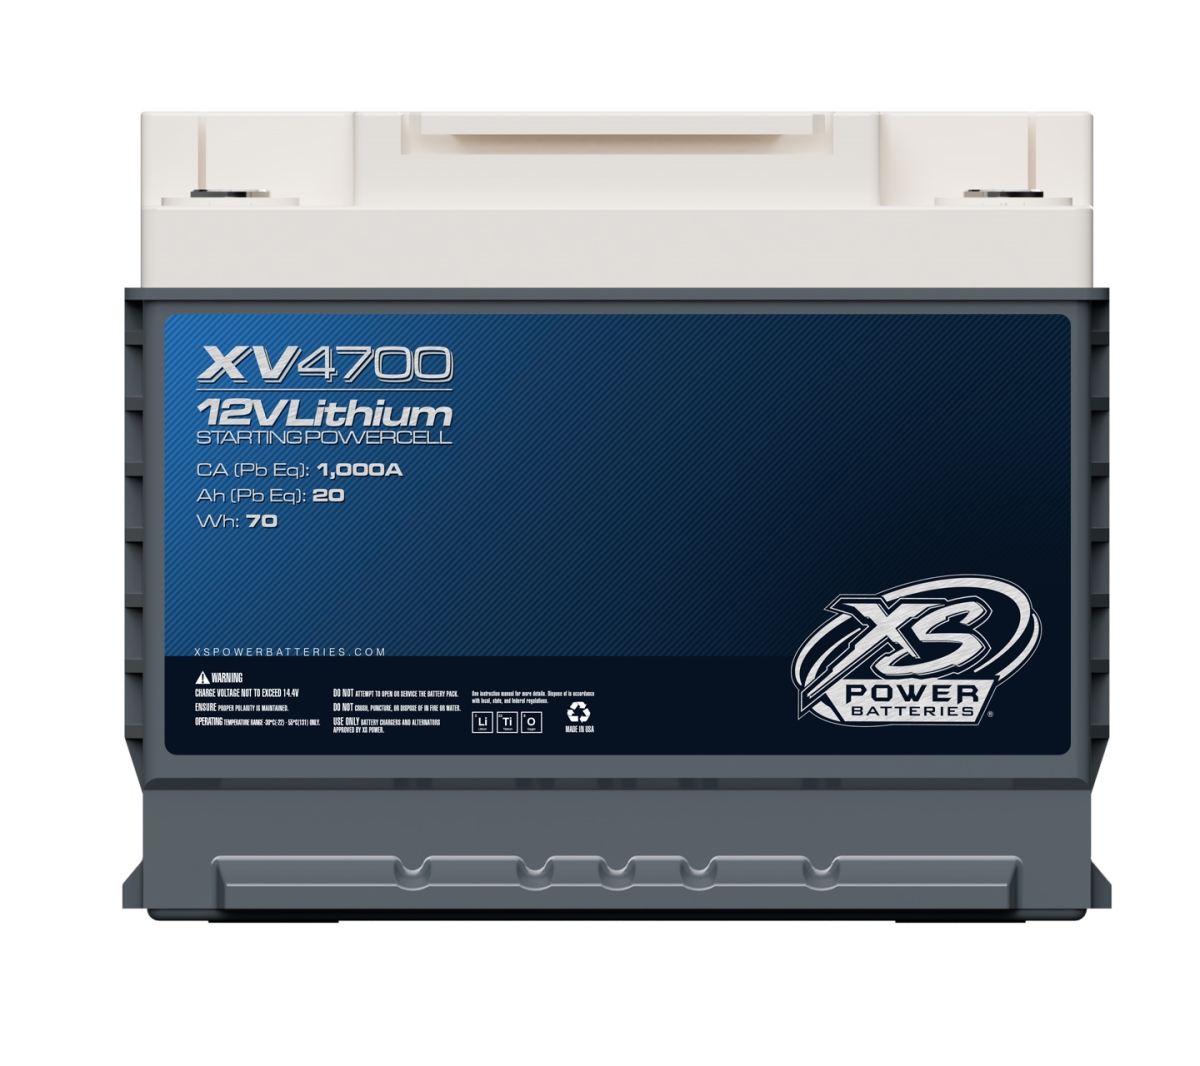 Picture of XS Power Batteries XSP-XV4700 1335 Max Amps 12V M6 Terminal Bolts Lithium Titanate XV Series Batteries